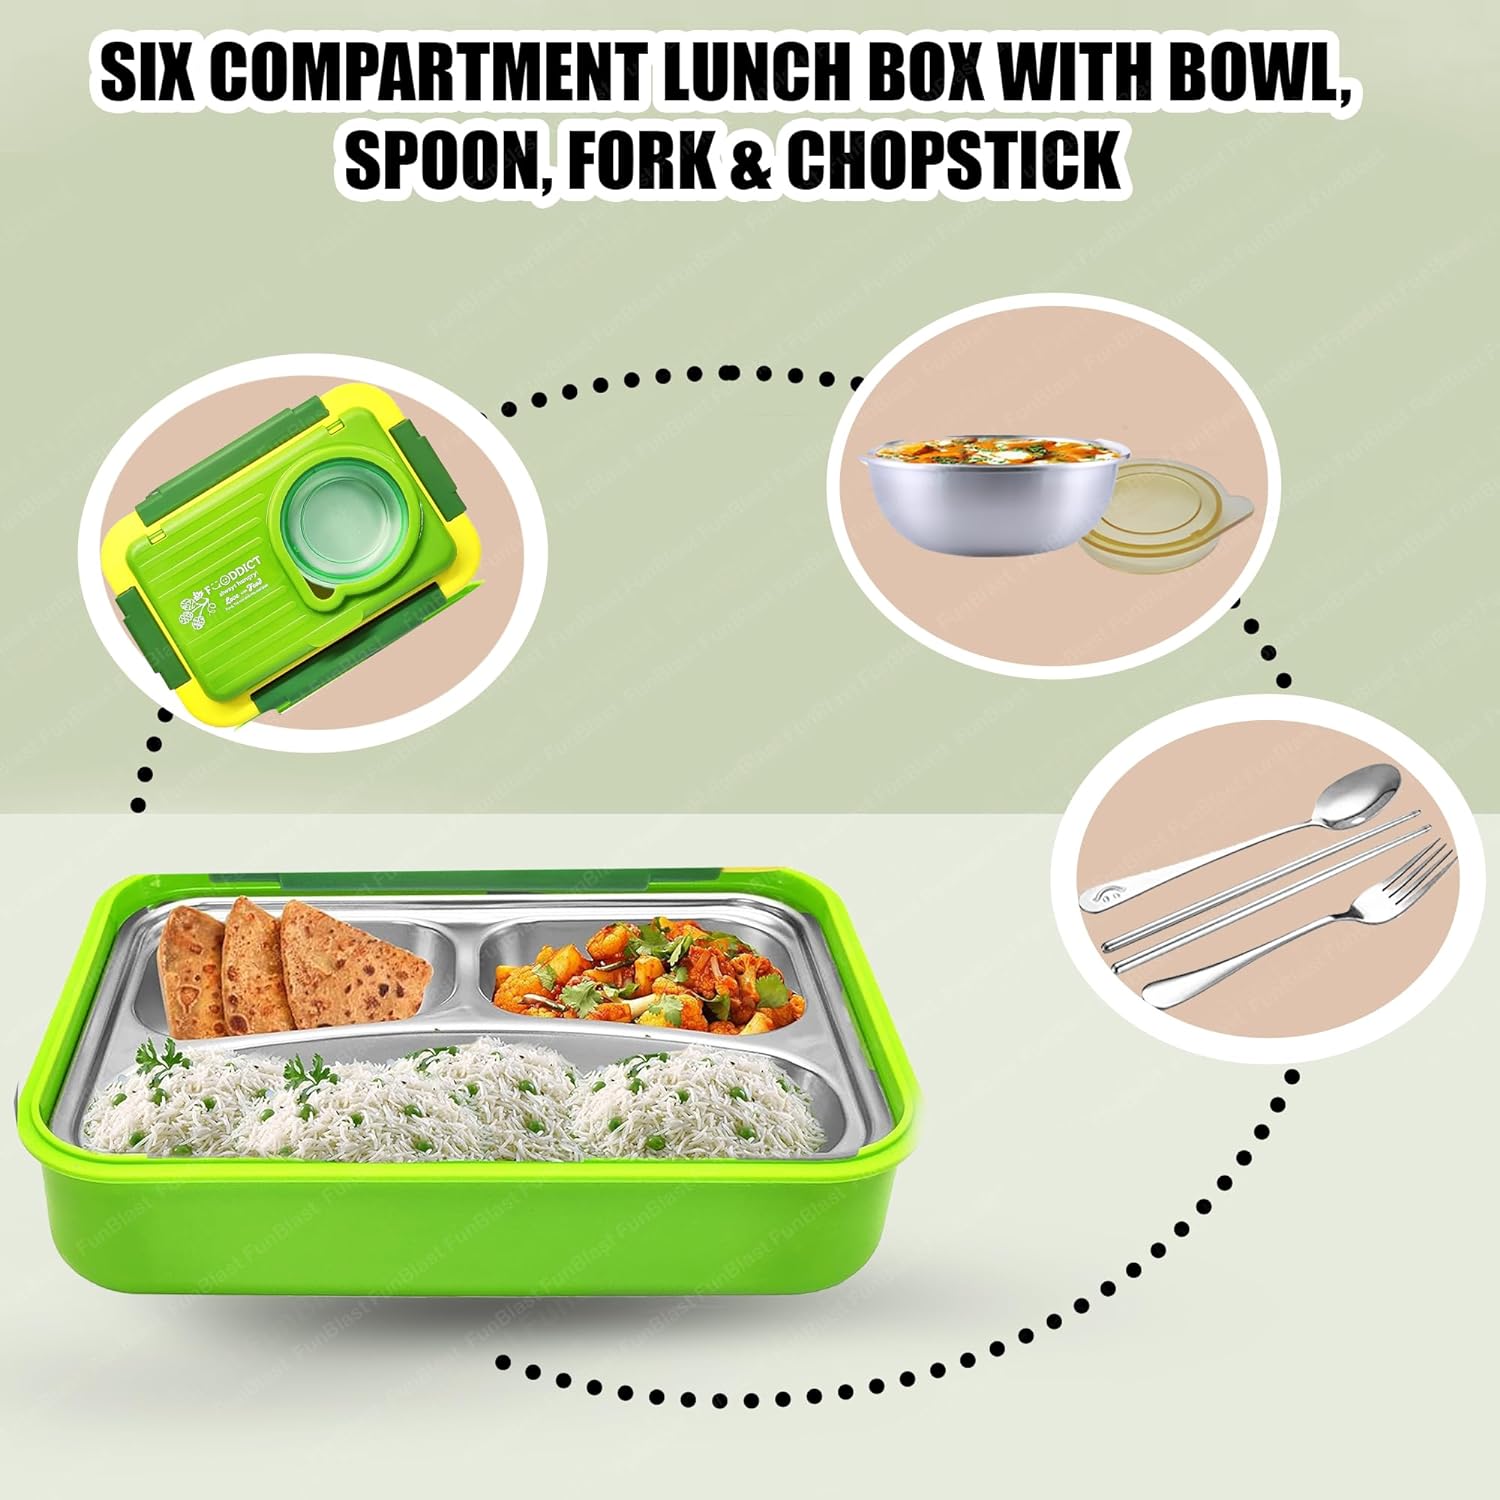 Lunch Box for Kids – Stainless Steel Lunch Box, 6 Compartment Lunch Box with Bowl, Spoon, Fork & Chopstick, Tiffin Box, Insulated Bento Lunch Box for Kids (Green)